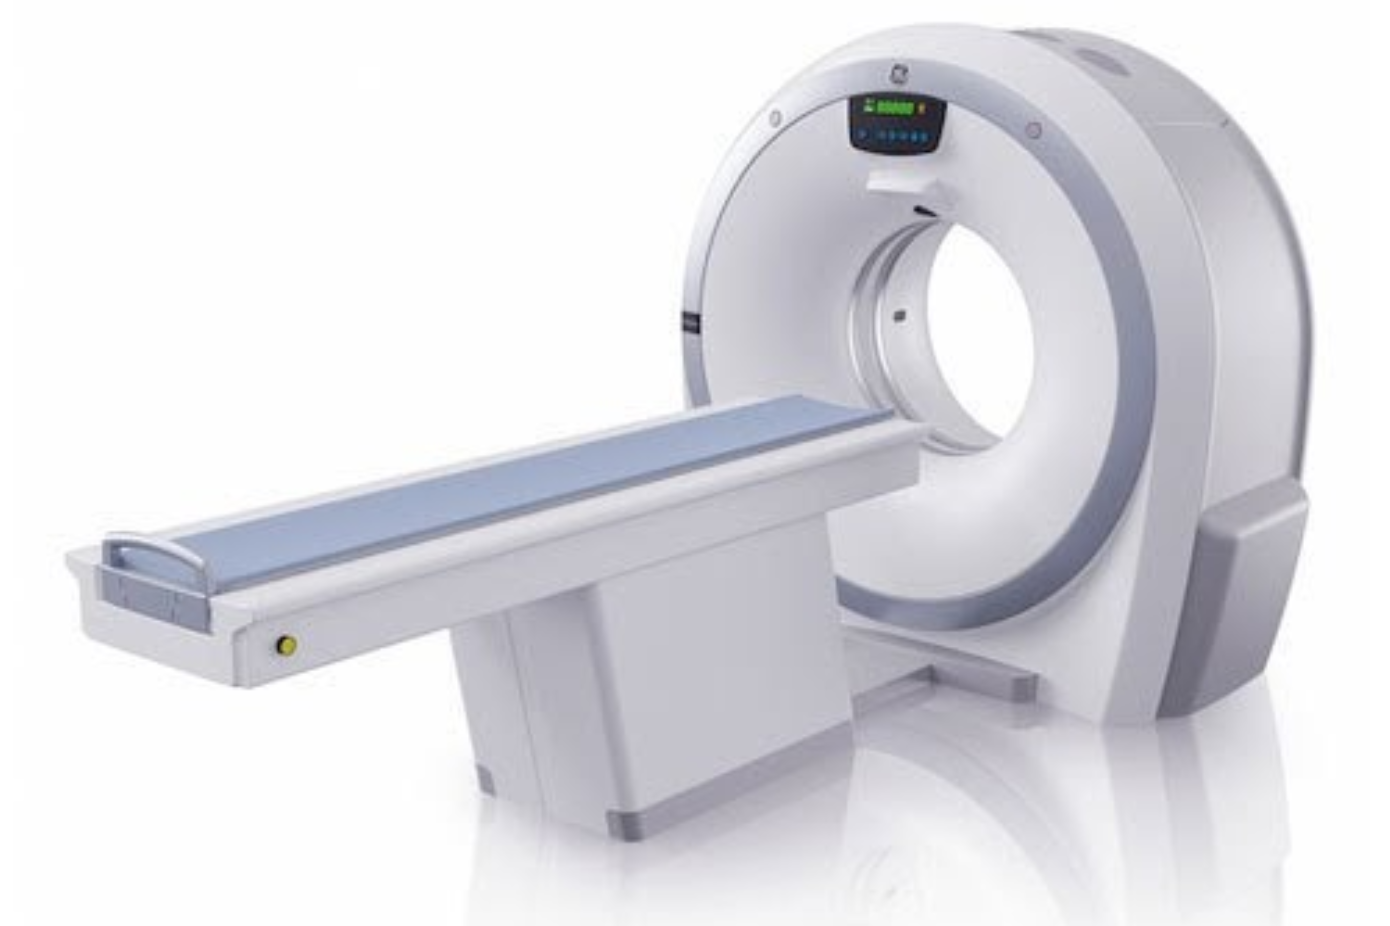 REVOLUTION ACTs CT SCAN